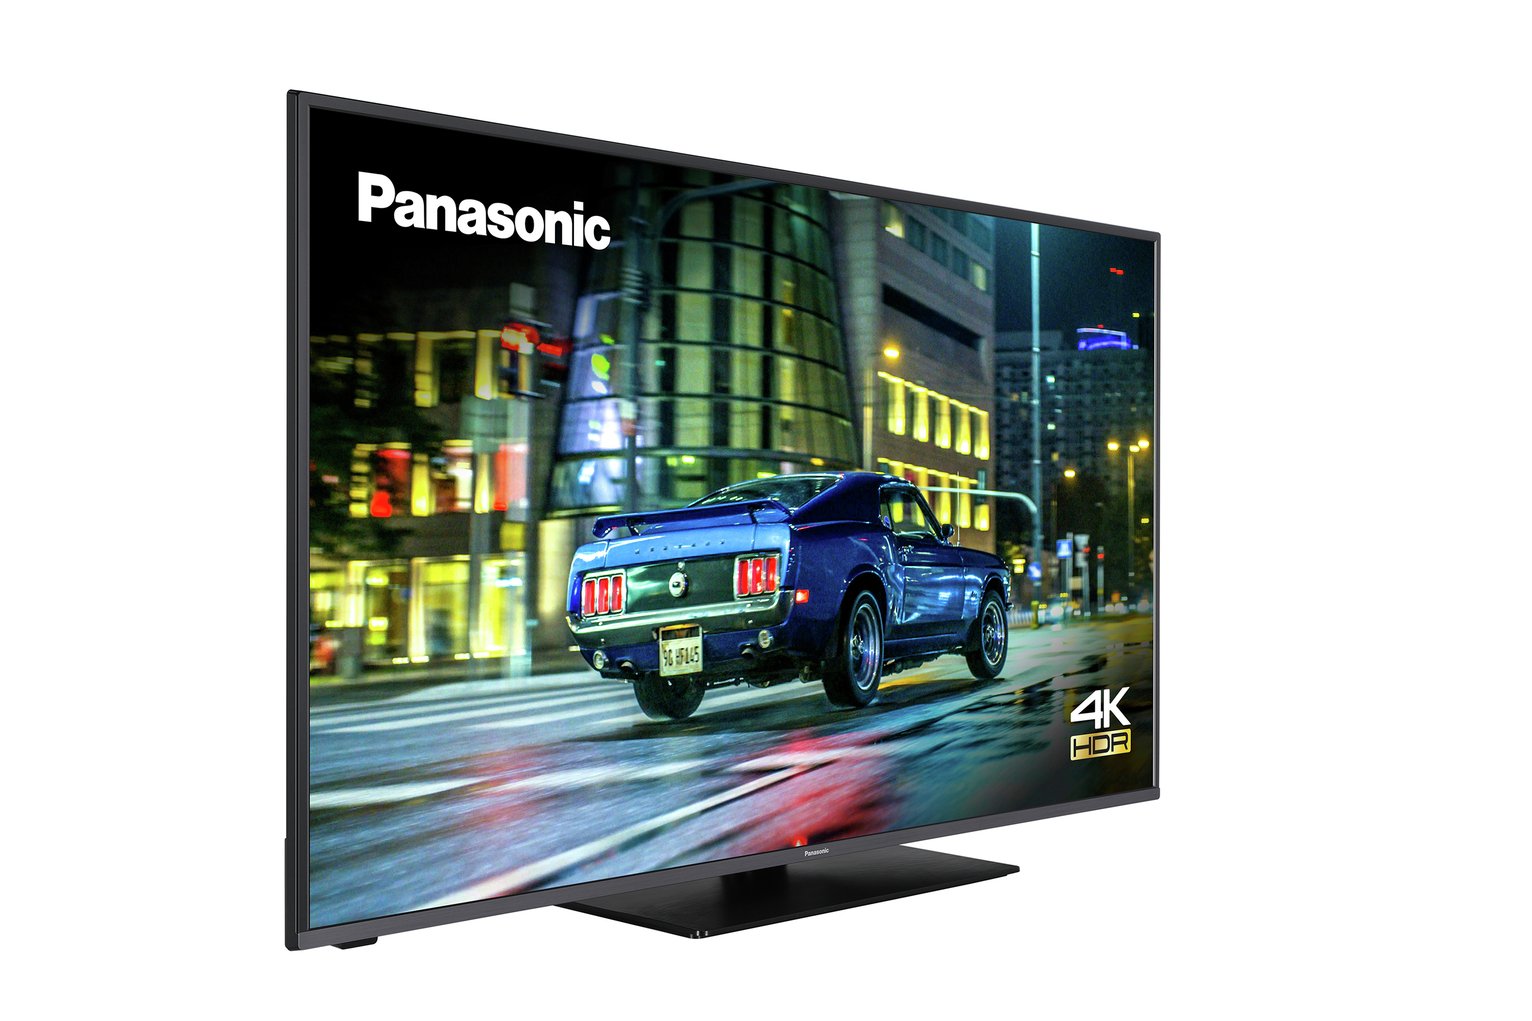 Panasonic 50 Inch TX-50HX580B Smart 4K LED TV with HDR Review